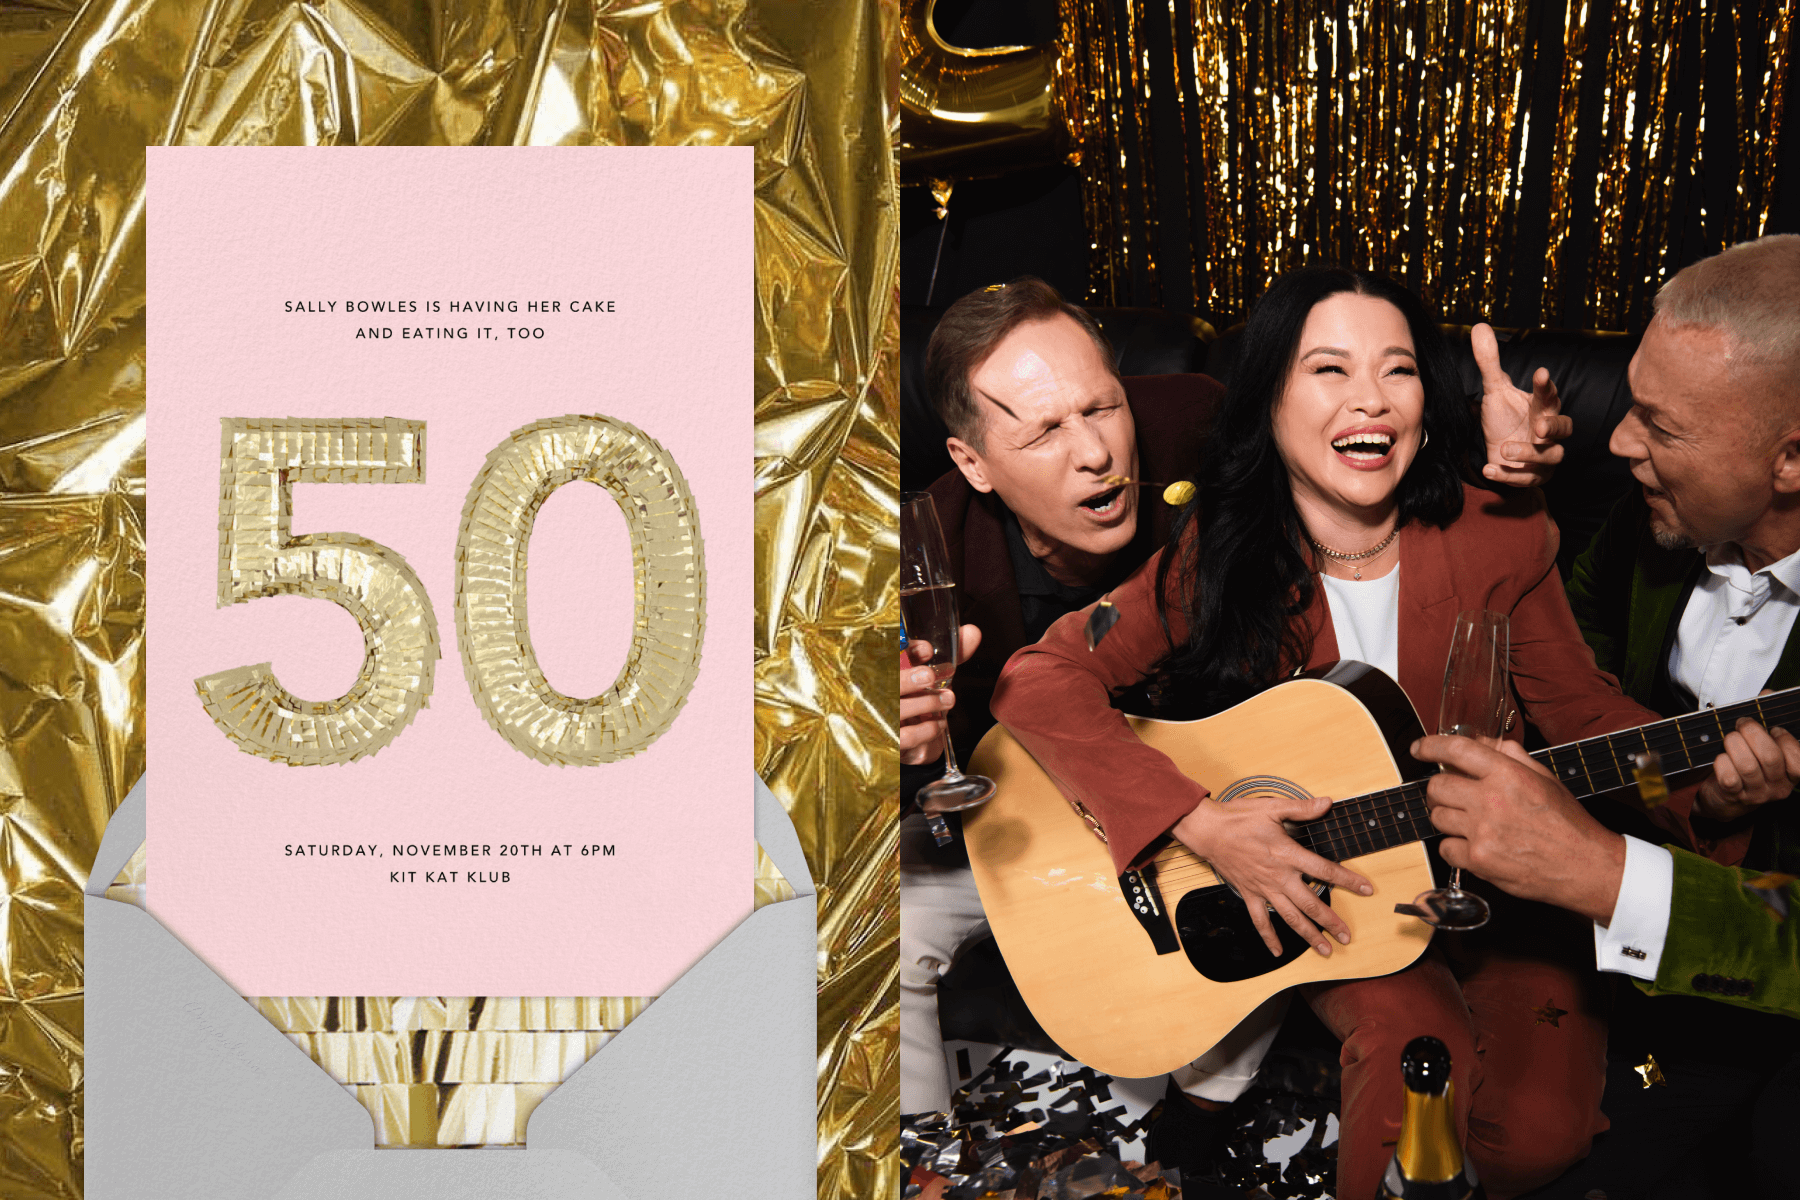 A pink birthday invitation with a gold number ‘50’; a woman playing guitar in front of gold streamers, two friends drinking Champagne and singing along.